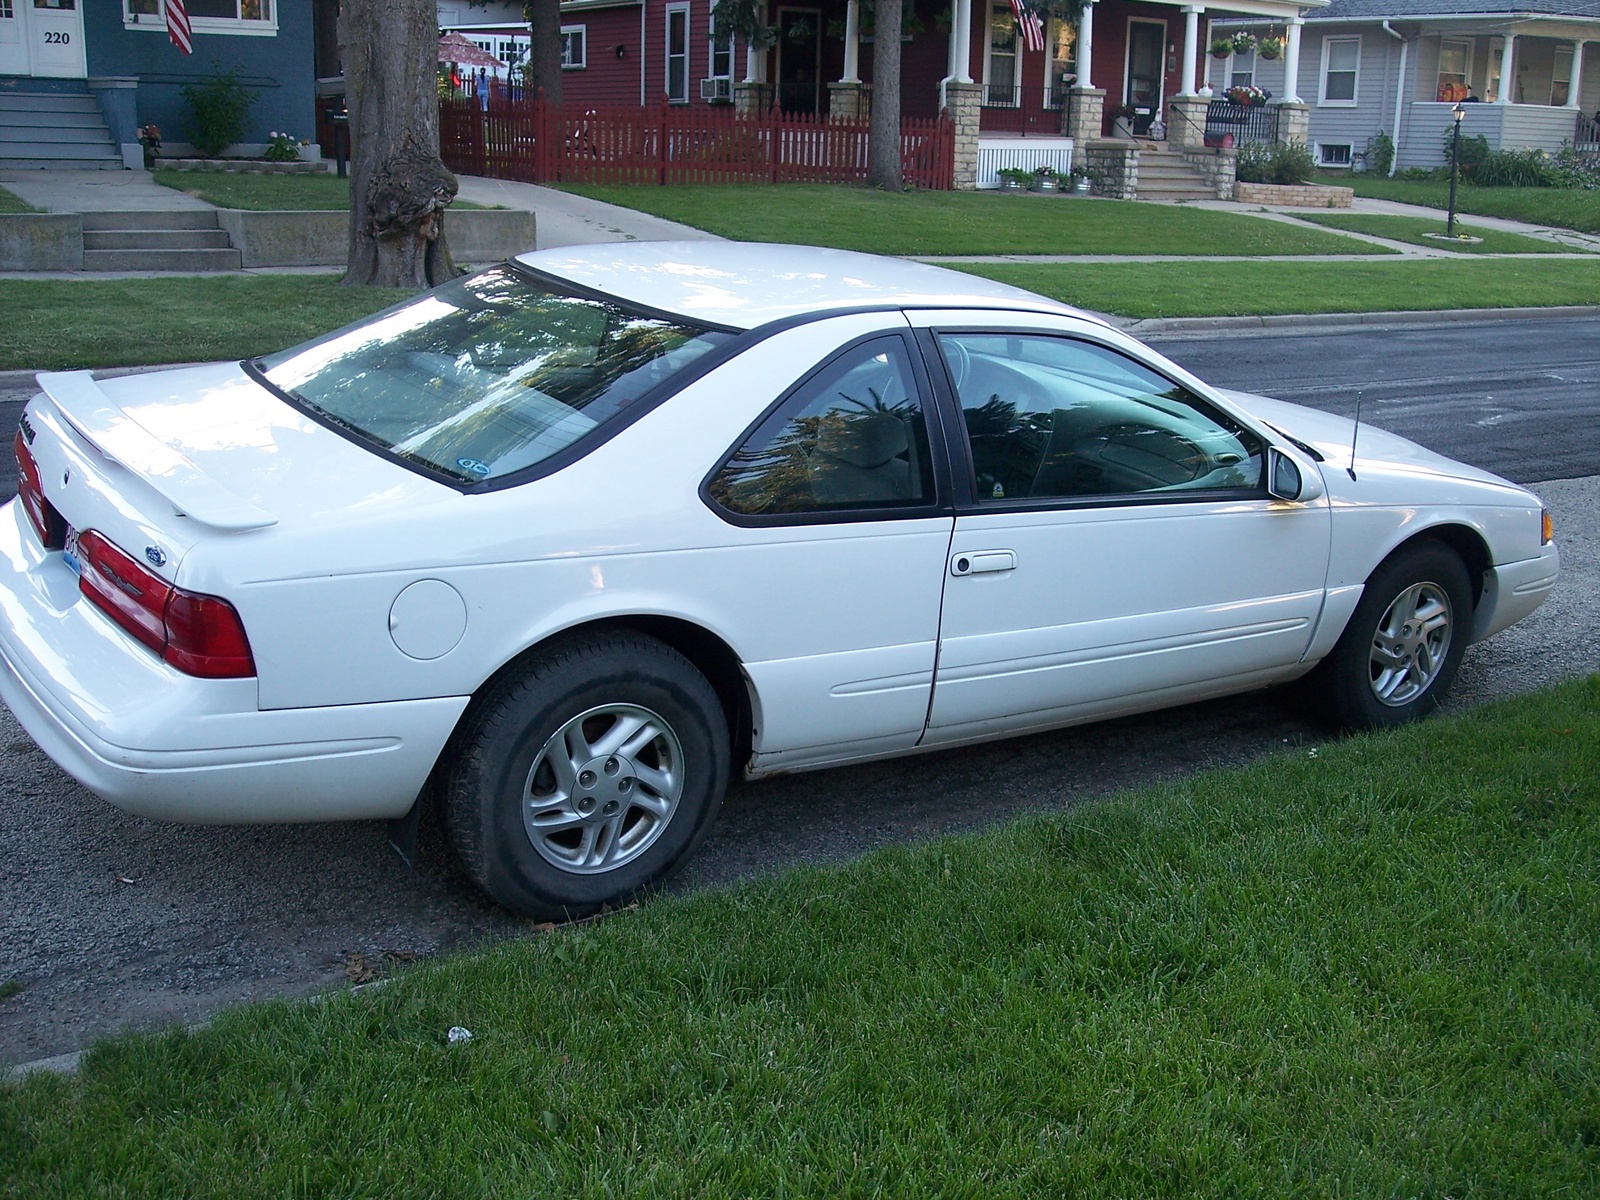 1996 Ford thunderbird lx coupe review #5